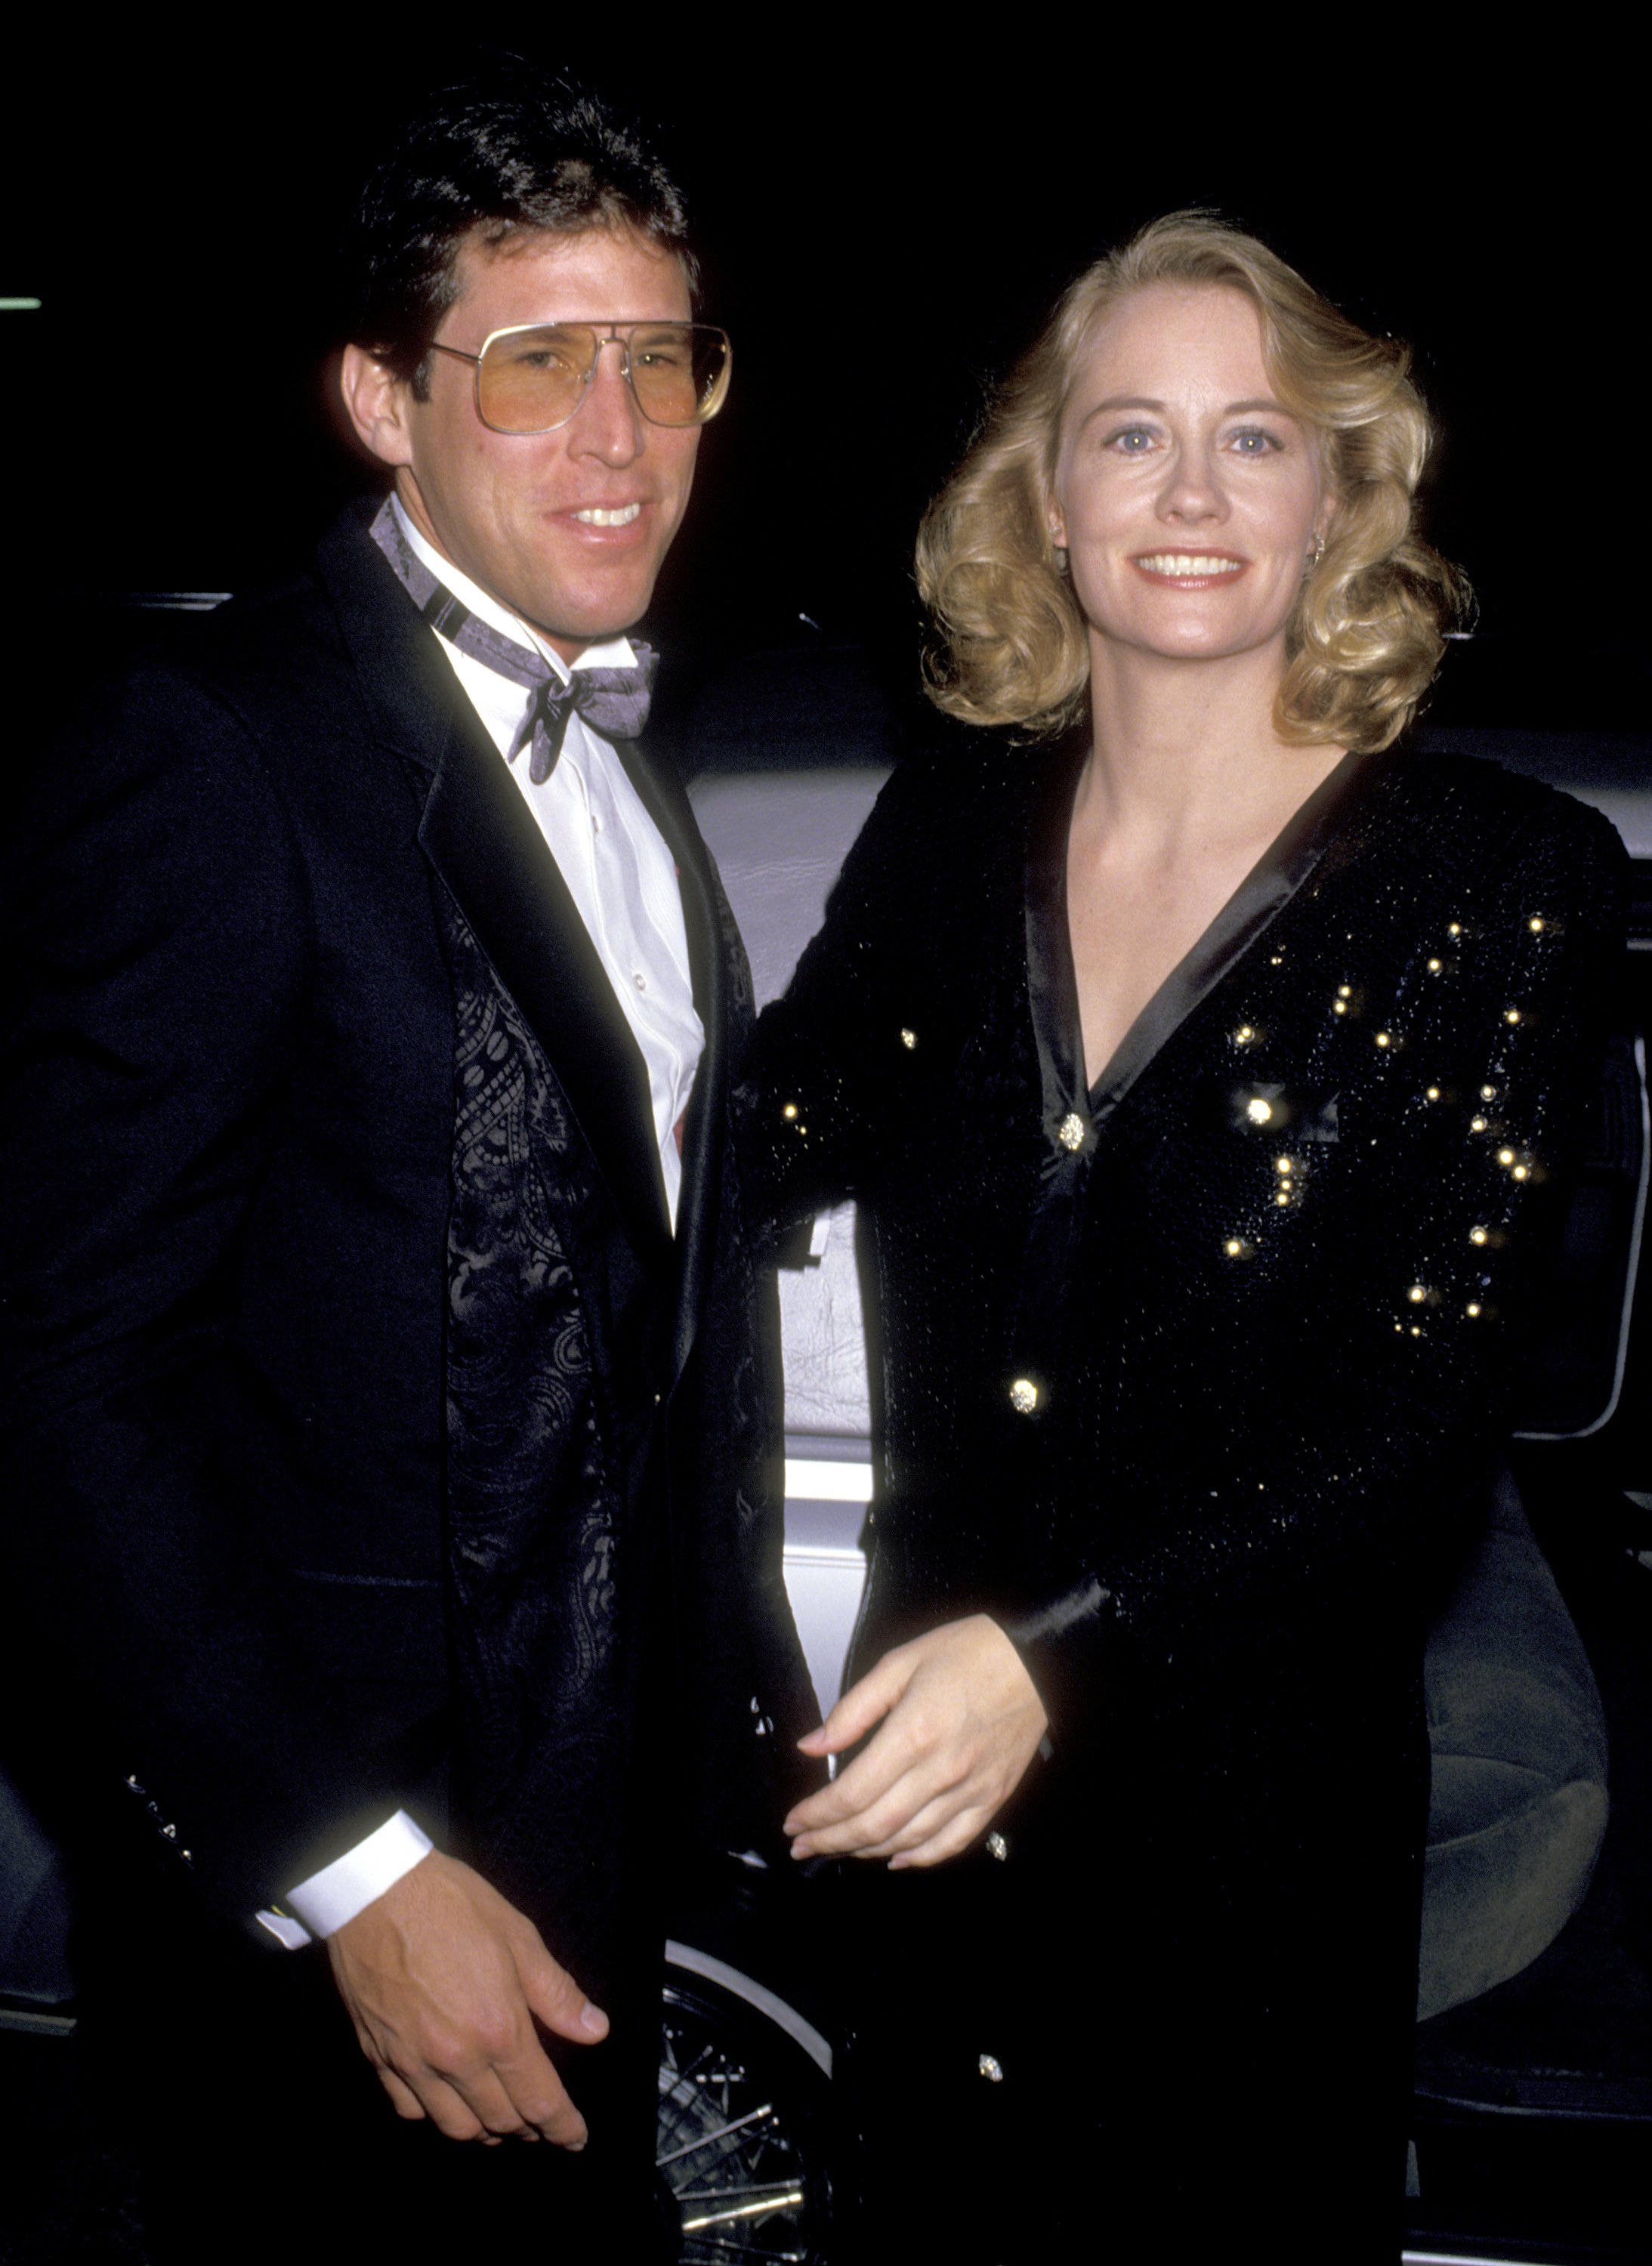 Bruce Oppenheim and Cybill Shepherd attend the 27th Annual International Broadcasting Award at Century Plaza Hotel in Los Angeles, California. | Source: Getty Images